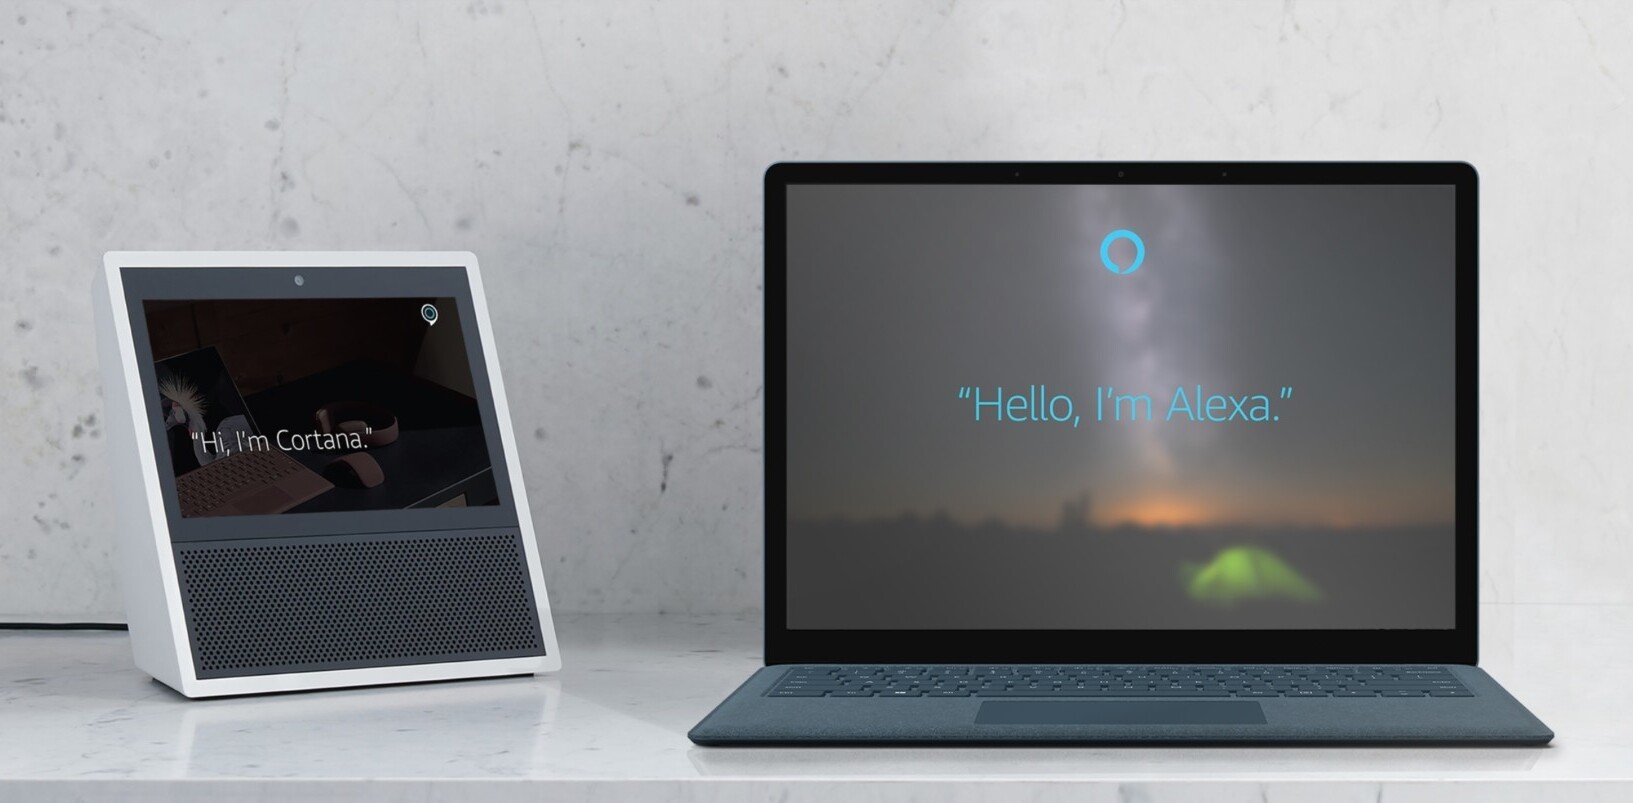 Alexa and Cortana are teaming up, and that’s good for everyone